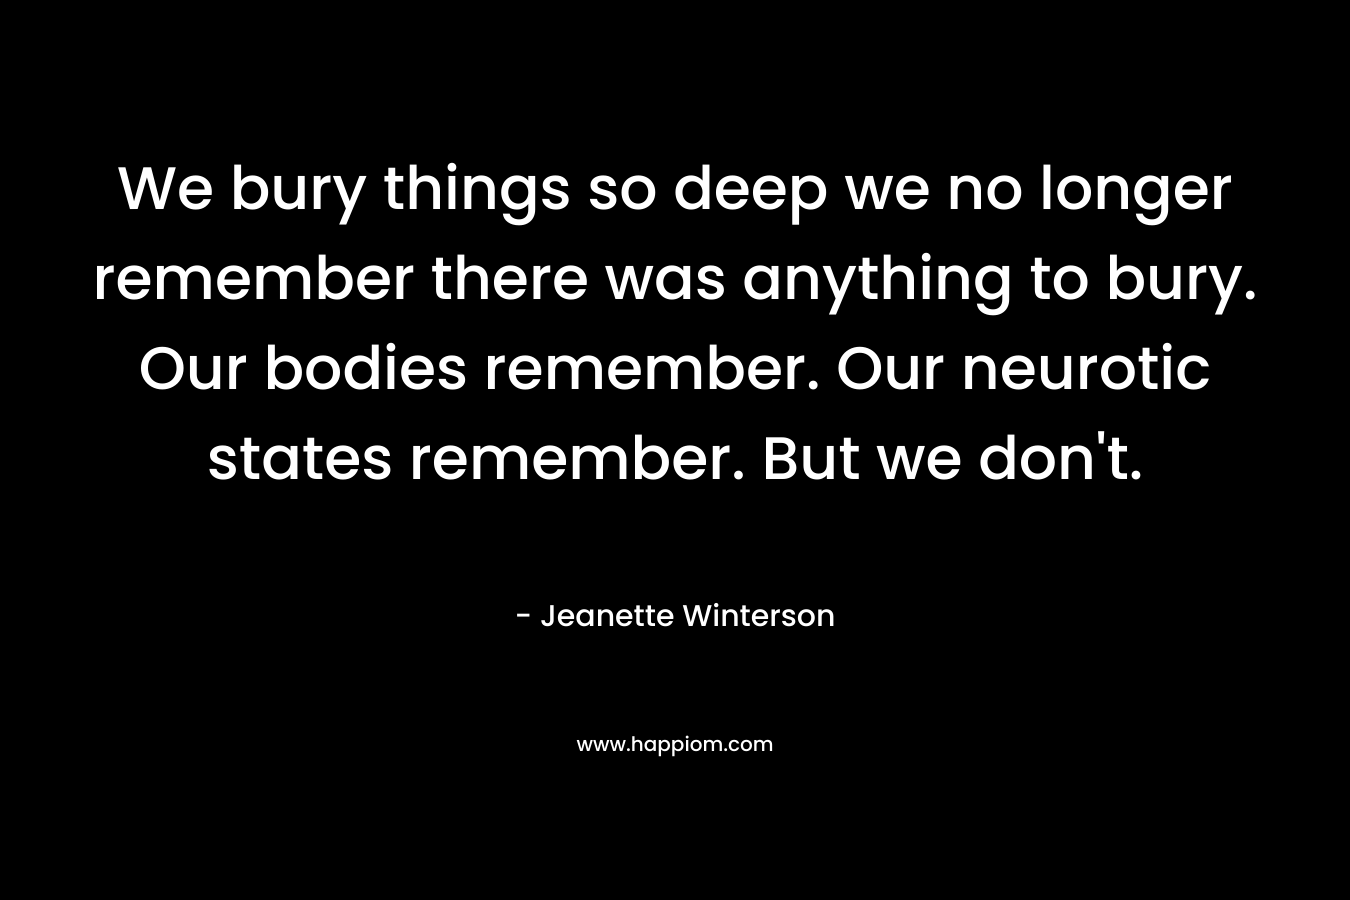 We bury things so deep we no longer remember there was anything to bury. Our bodies remember. Our neurotic states remember. But we don't.